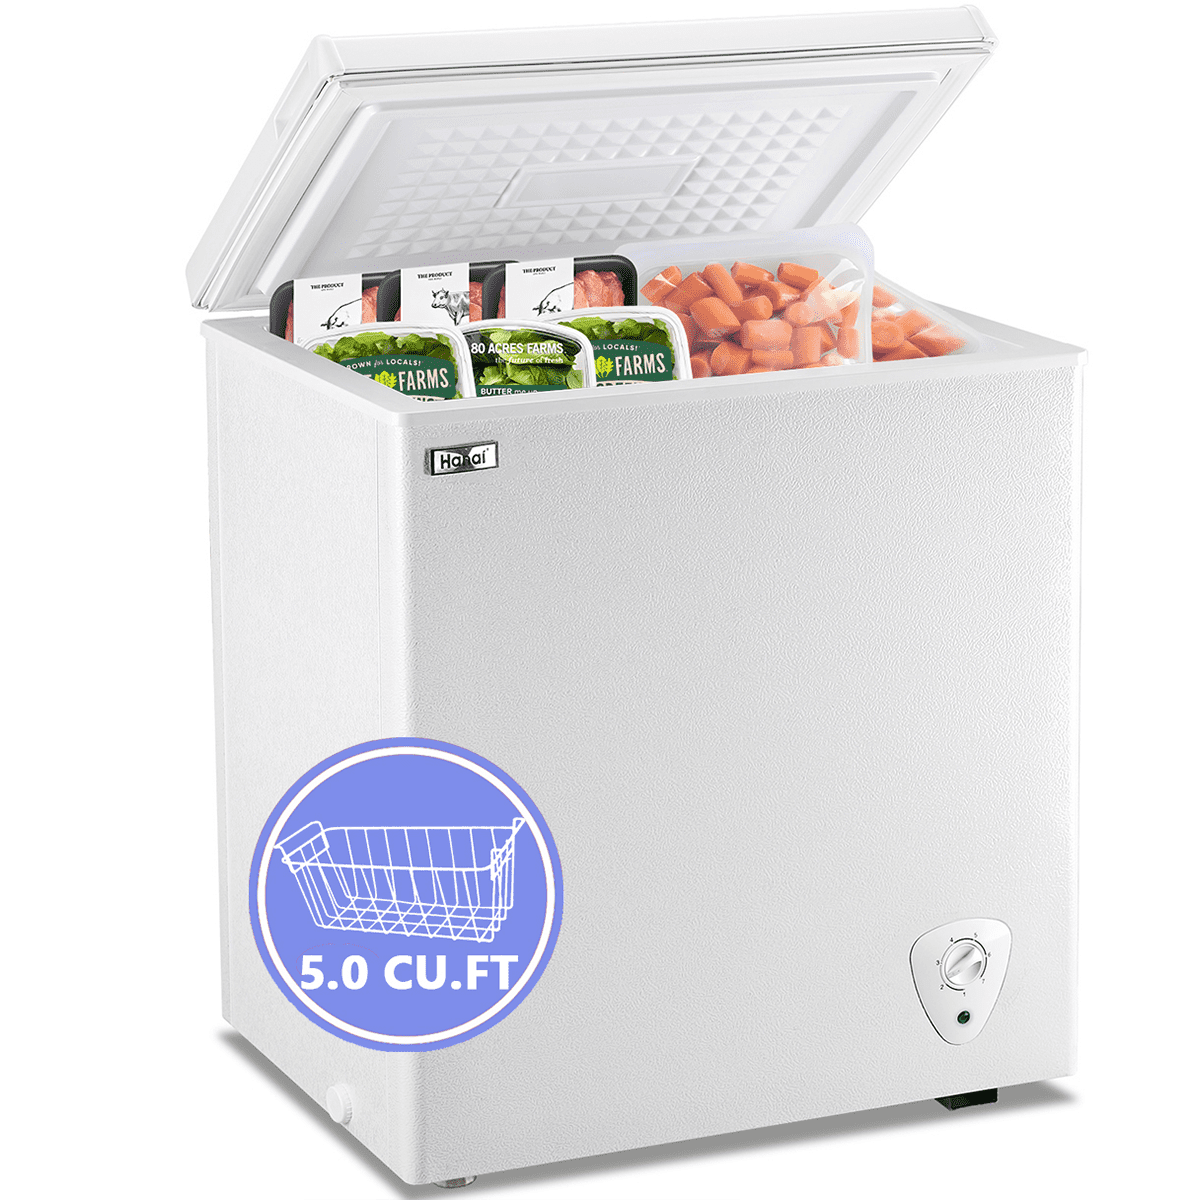 WANAI Chest Freezer 3.5 Cubic Feet Mini Small Deep Freezers with Adjustable  Thermostat Top Open Door Freezer Compressor Cooling with Rmovable Storage